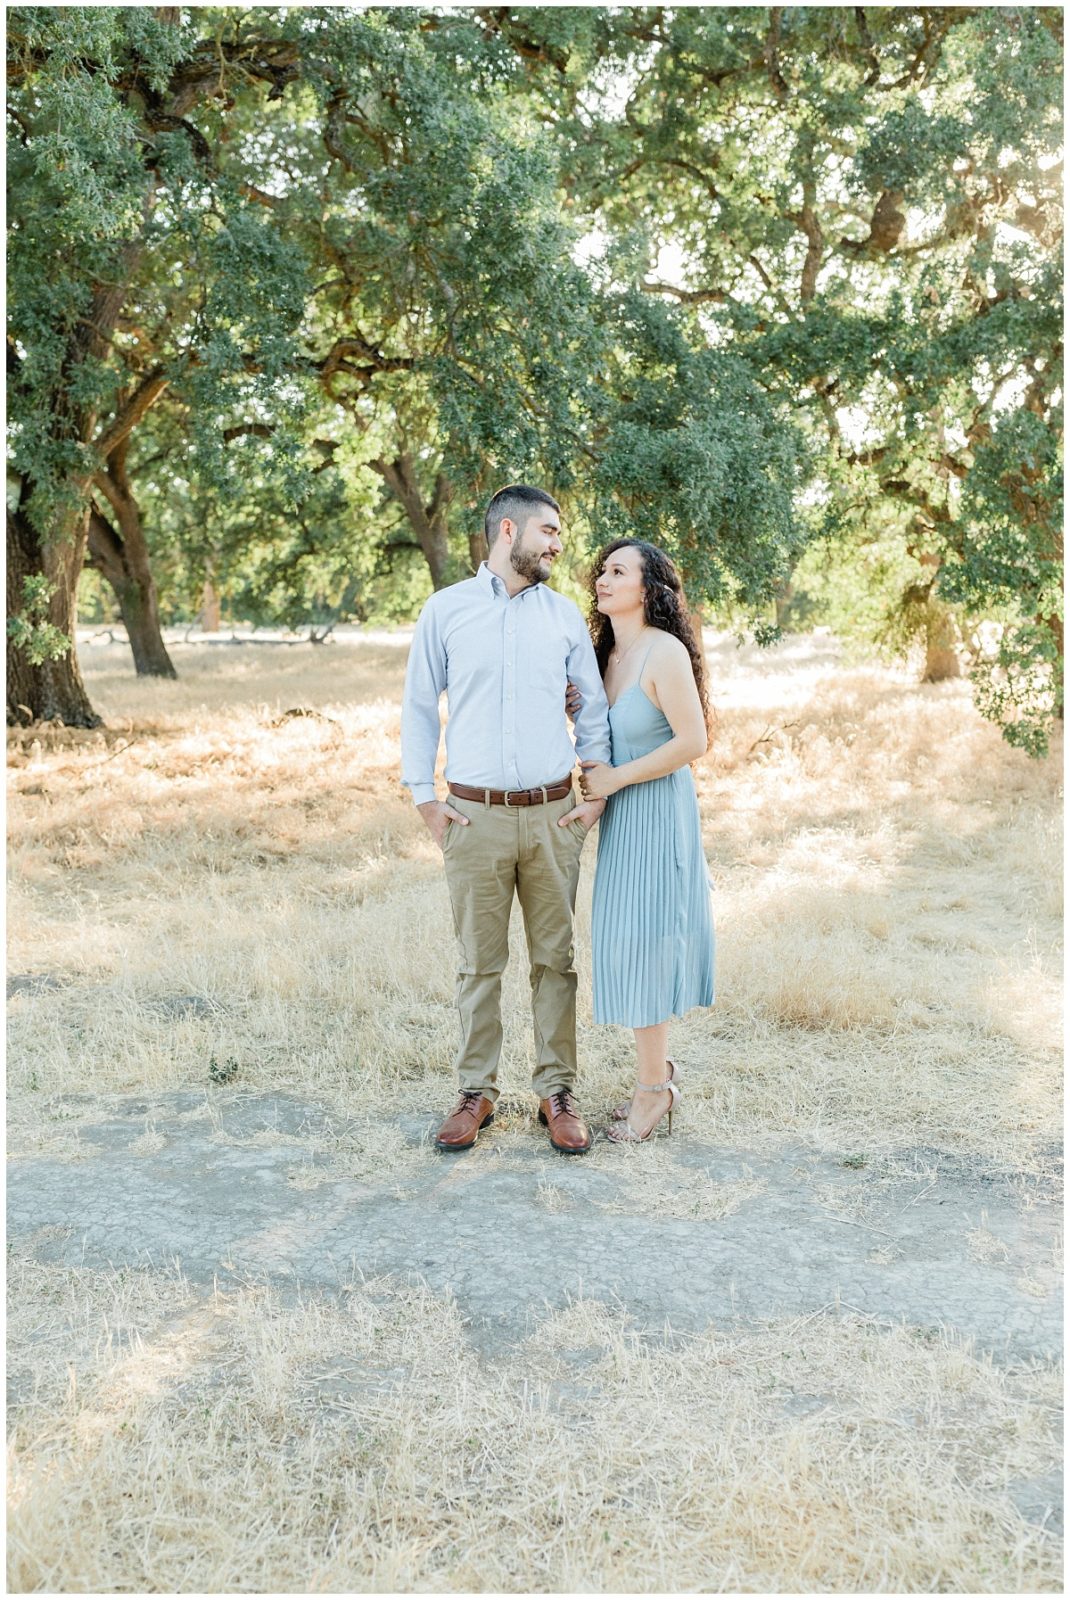 Outdoor Engagement in California Lush Spring